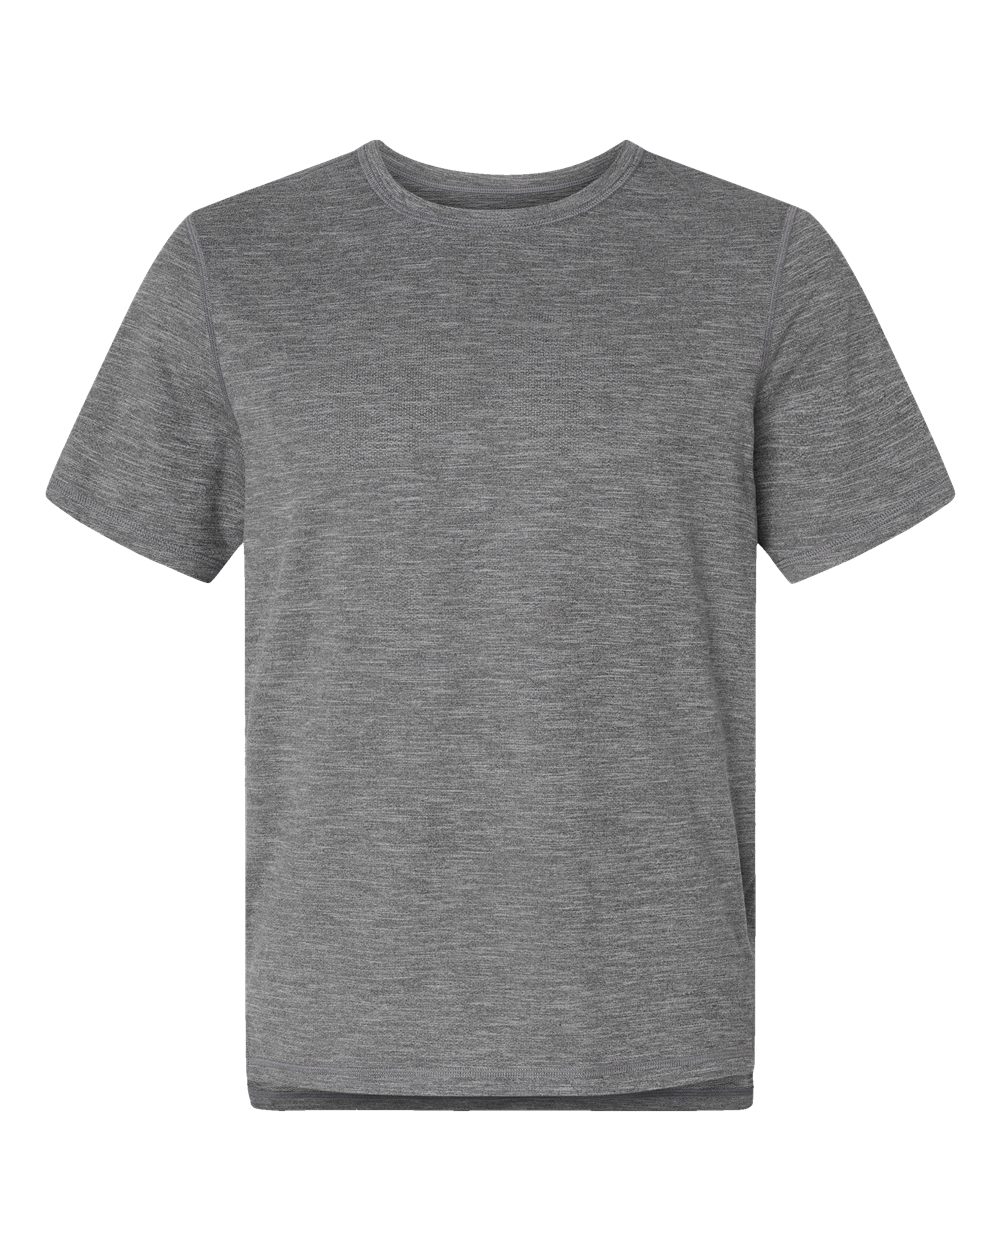 click to view Railroad Grey Heather